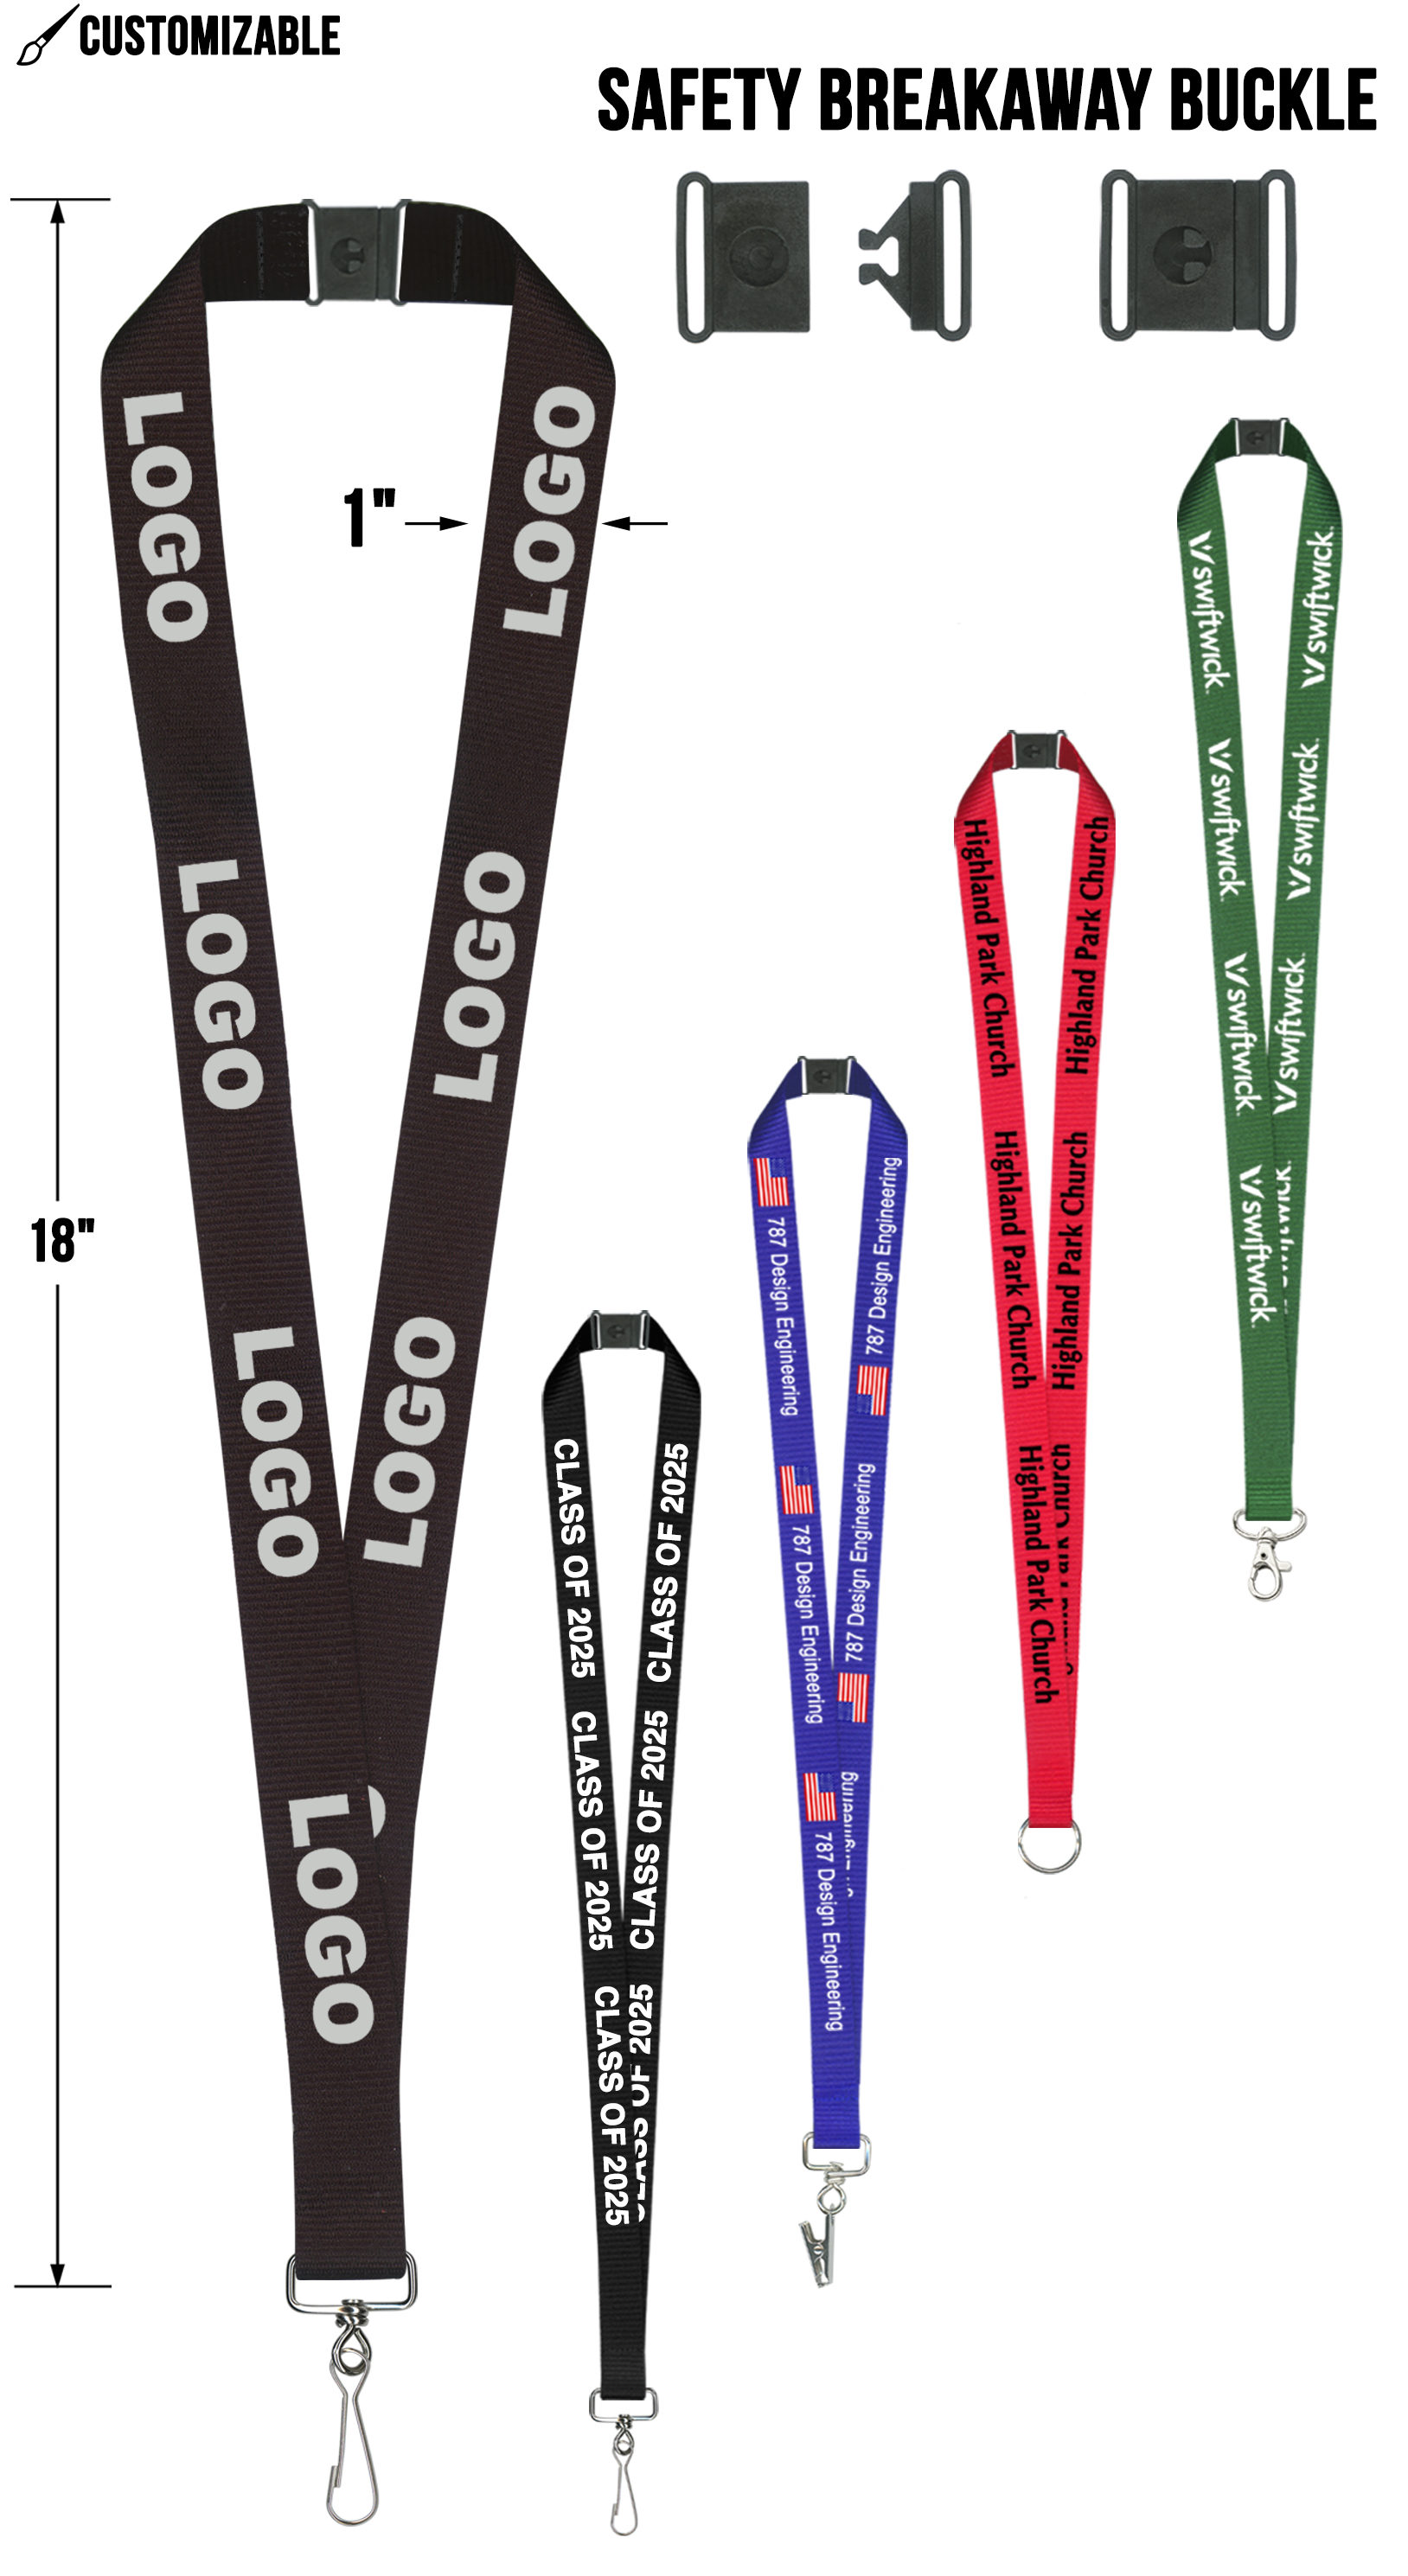 1" Premium Lanyard with Tailored Logo Design - Complimentary Setup & Delivery